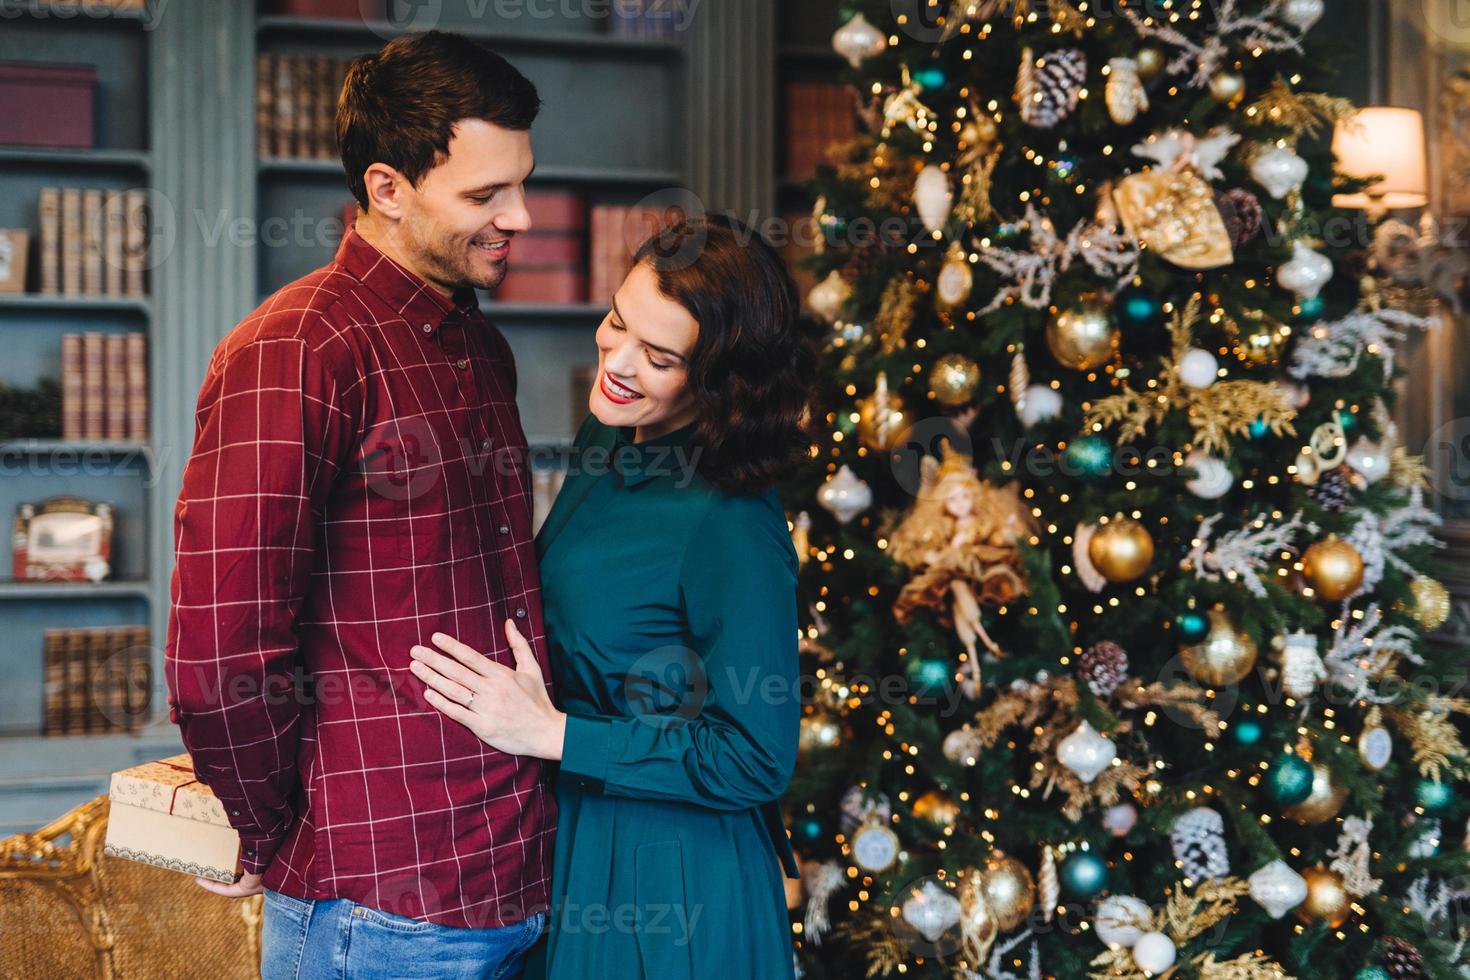 Lovely family couple pretty wife stands near her husband who prepares New Year present for her. Good relationnship concept. Woman and man stand against decorated Christmas tree. Winter holidays photo